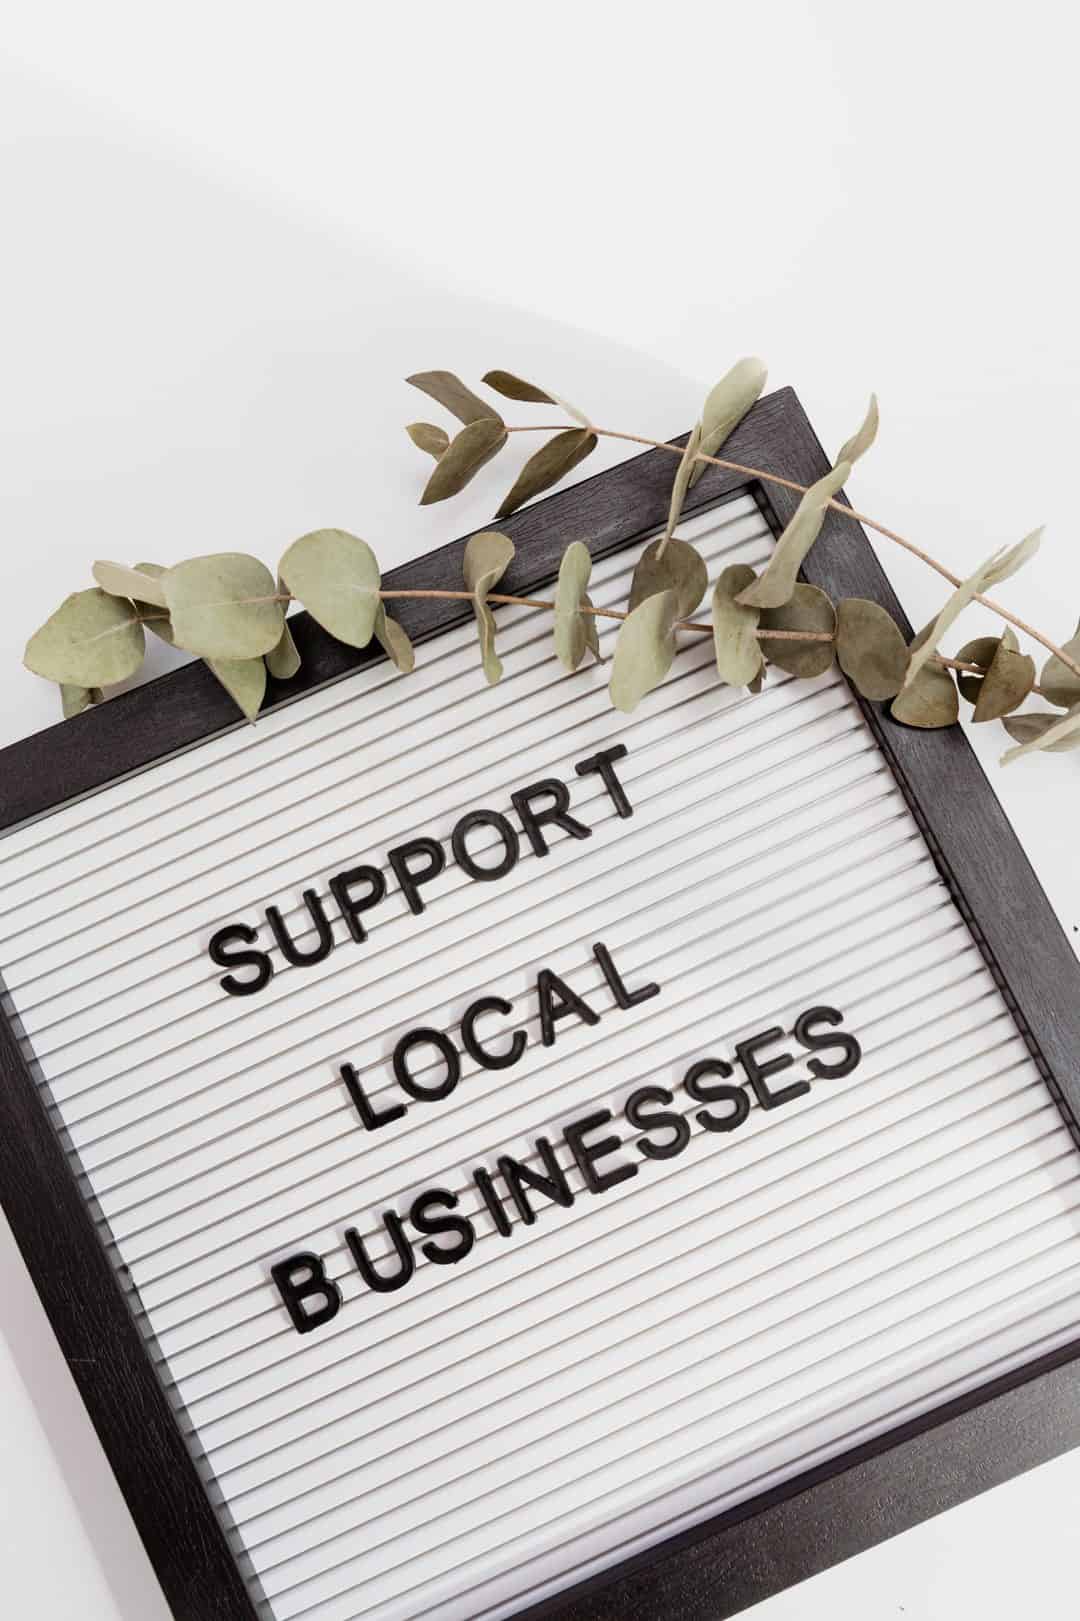 Websites Support Local Businesses